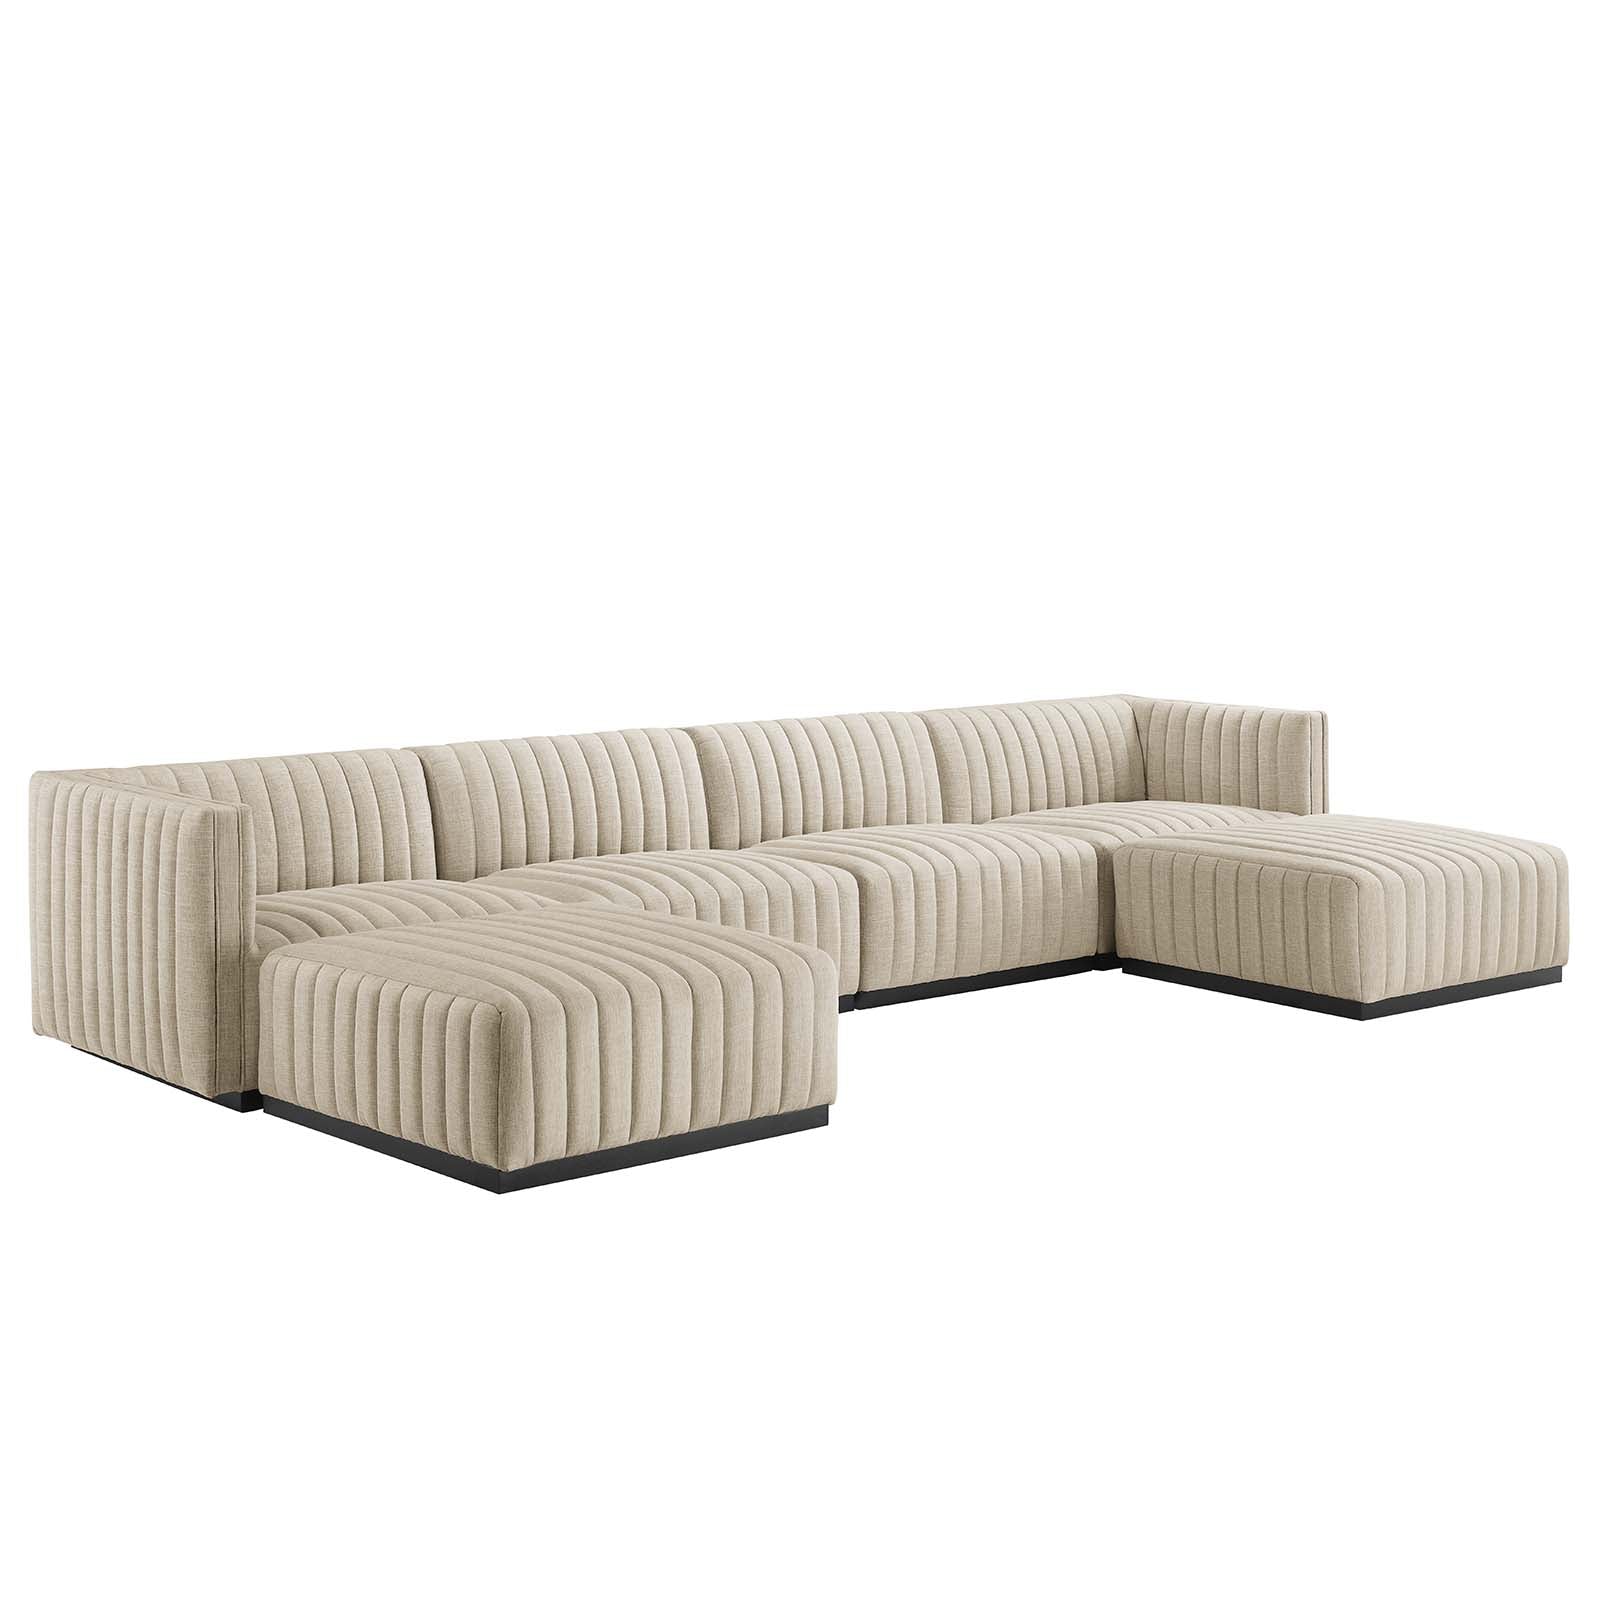 Modway Sectional Sofas - Conjure Channel Tufted Upholstered Fabric 6-Piece Sectional Sofa Black Beige